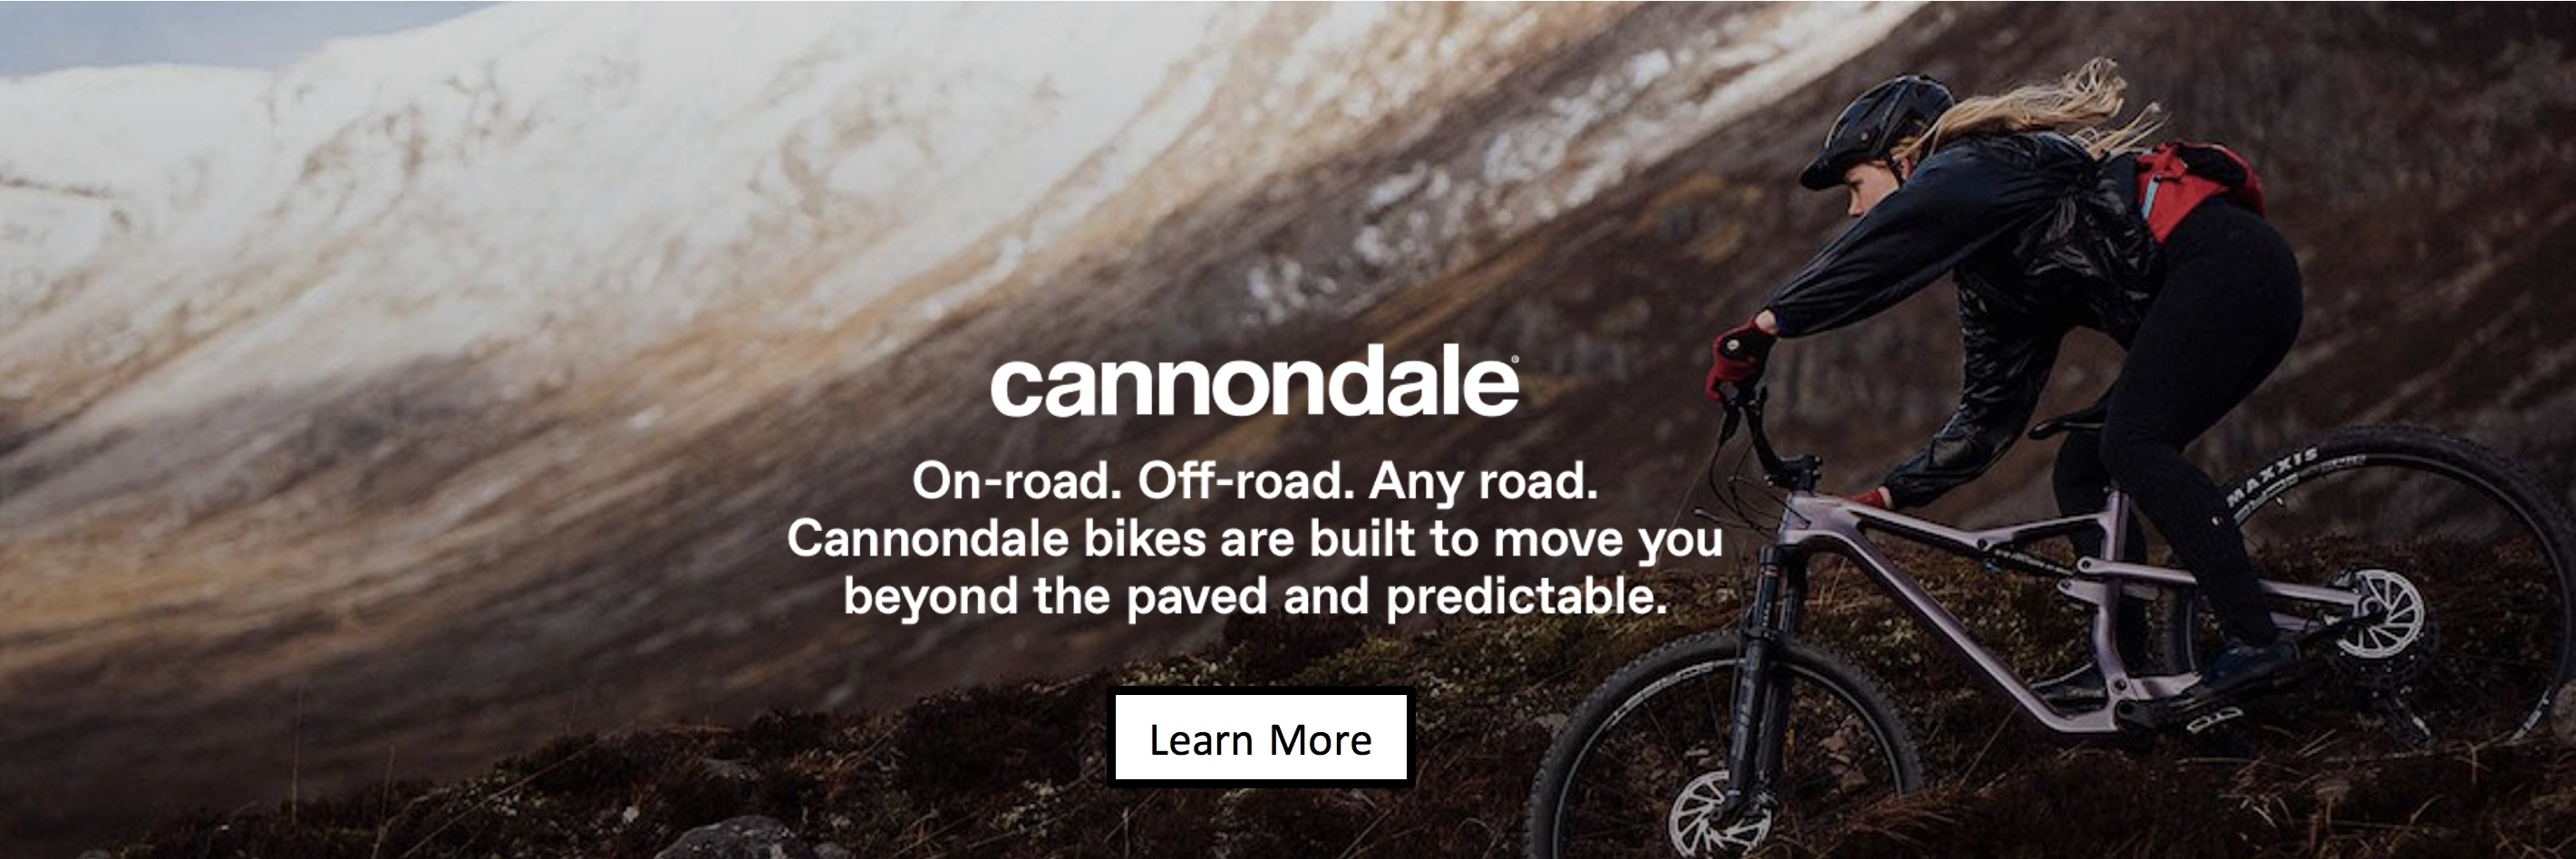 Cannondale. On-road. Off-road. Any road. Cannondale bikes are built to move you beyond the paved and predictable.